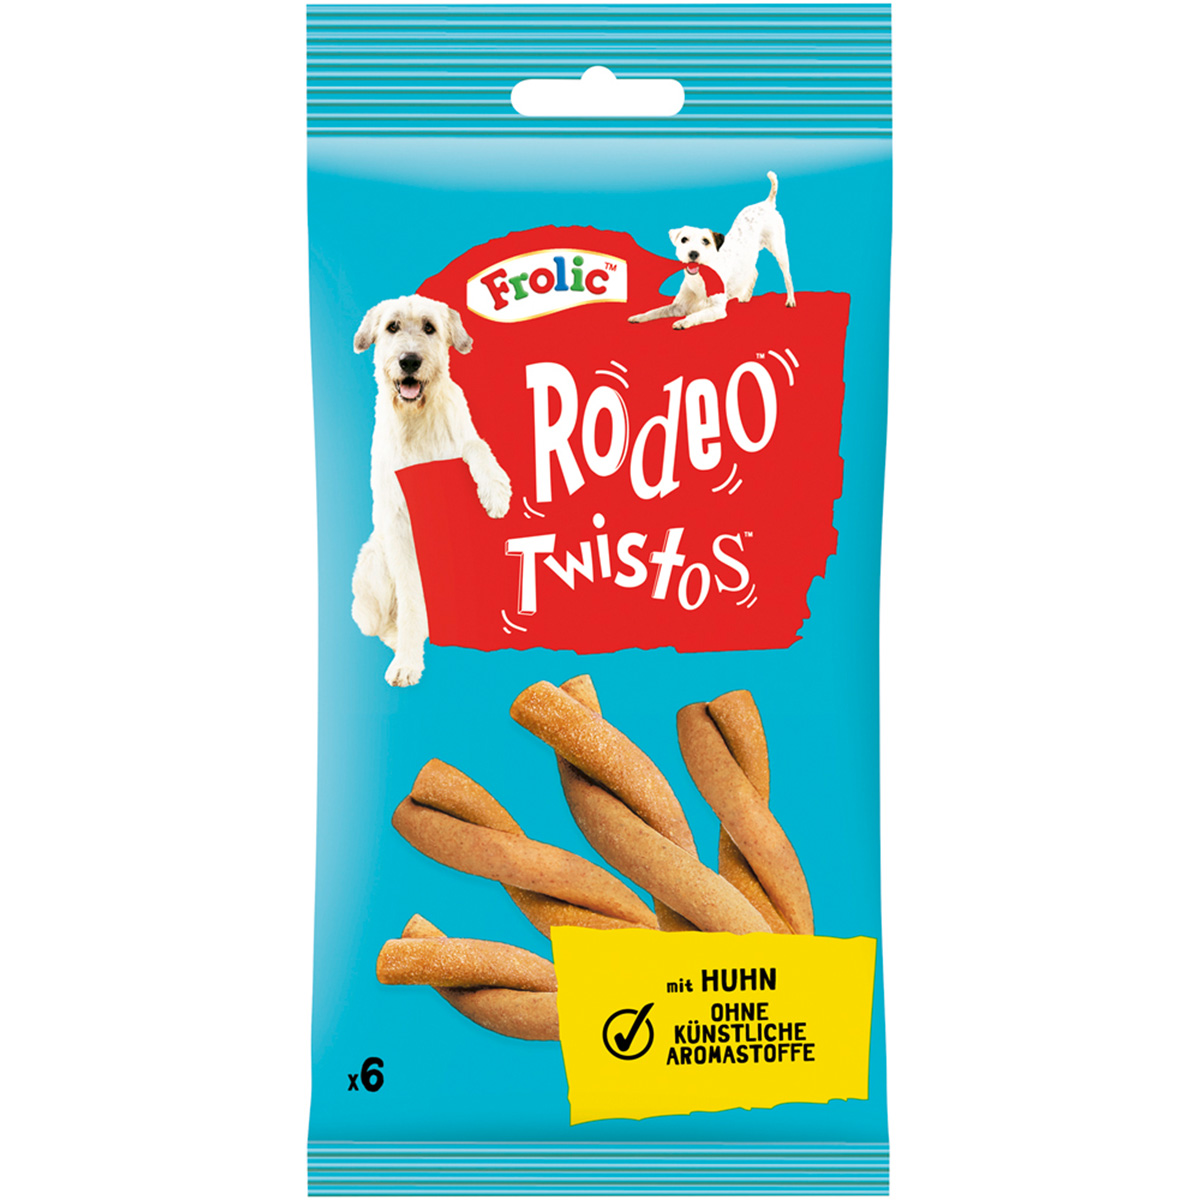 frolic hundesnack rodeo twistos mit huhn604a305b0dc92